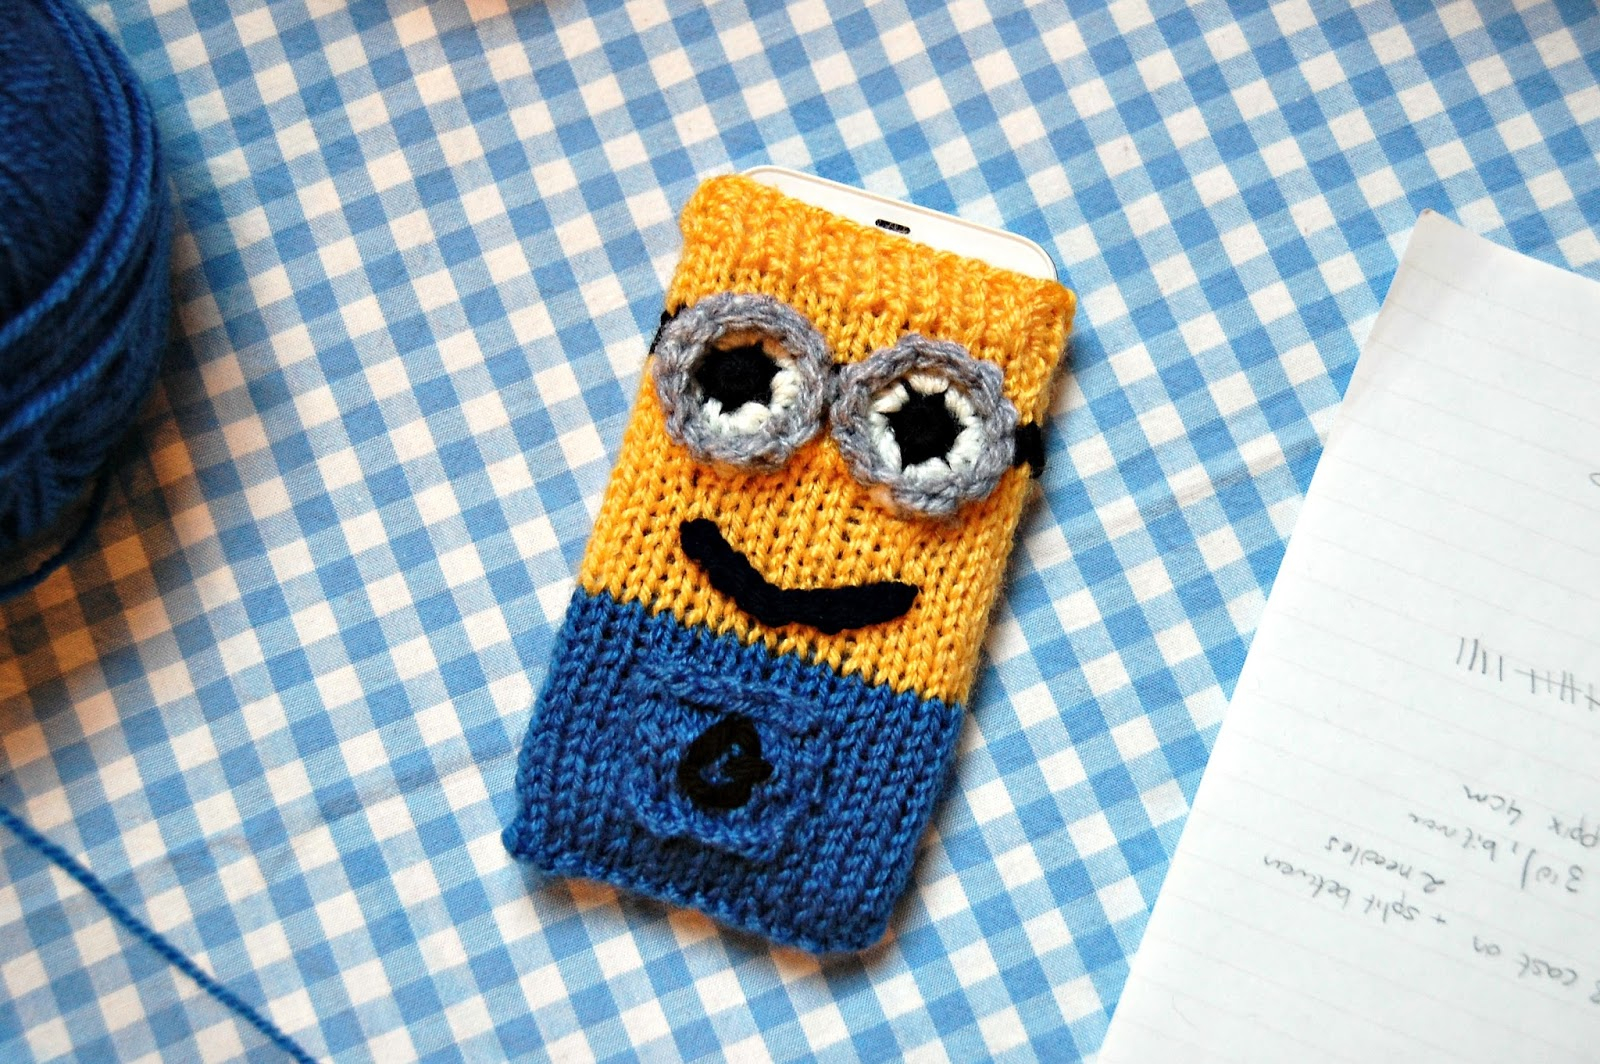 Knitting Patterns For Minions The Geeky Knitter Minion Phone Cover Free Knitting Pattern